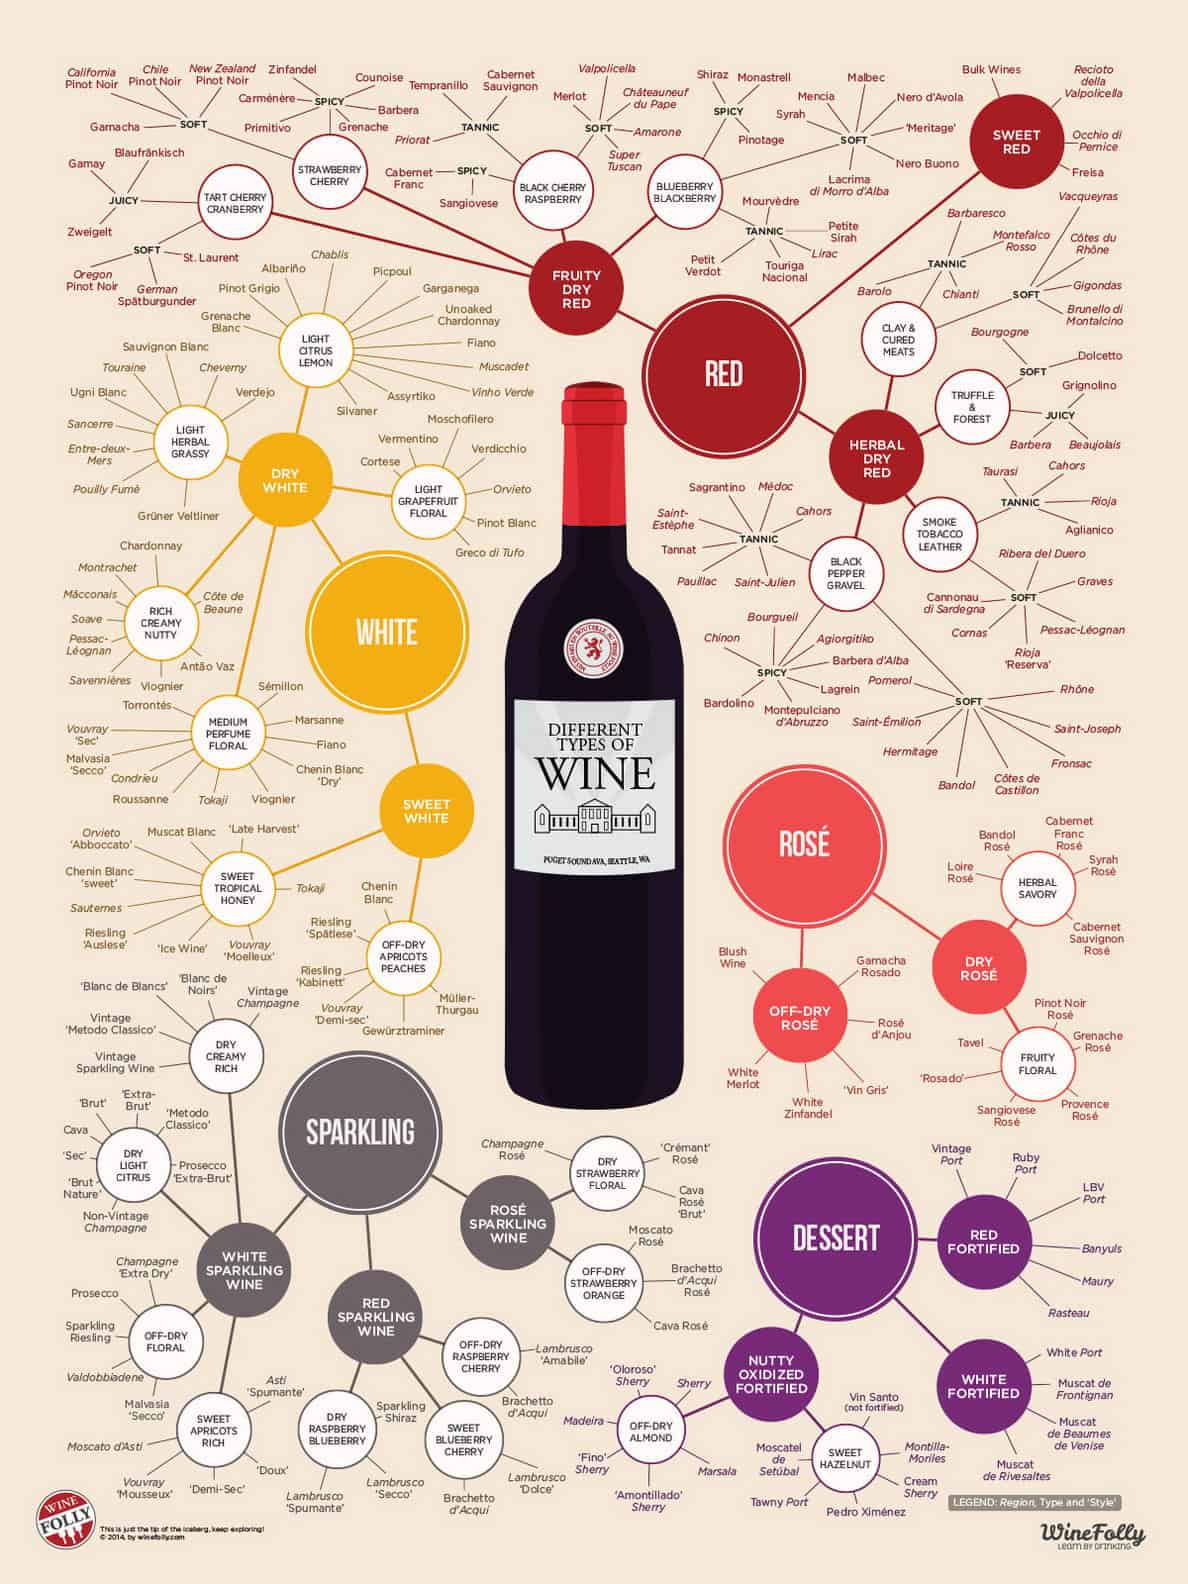 The Red Wine Guide